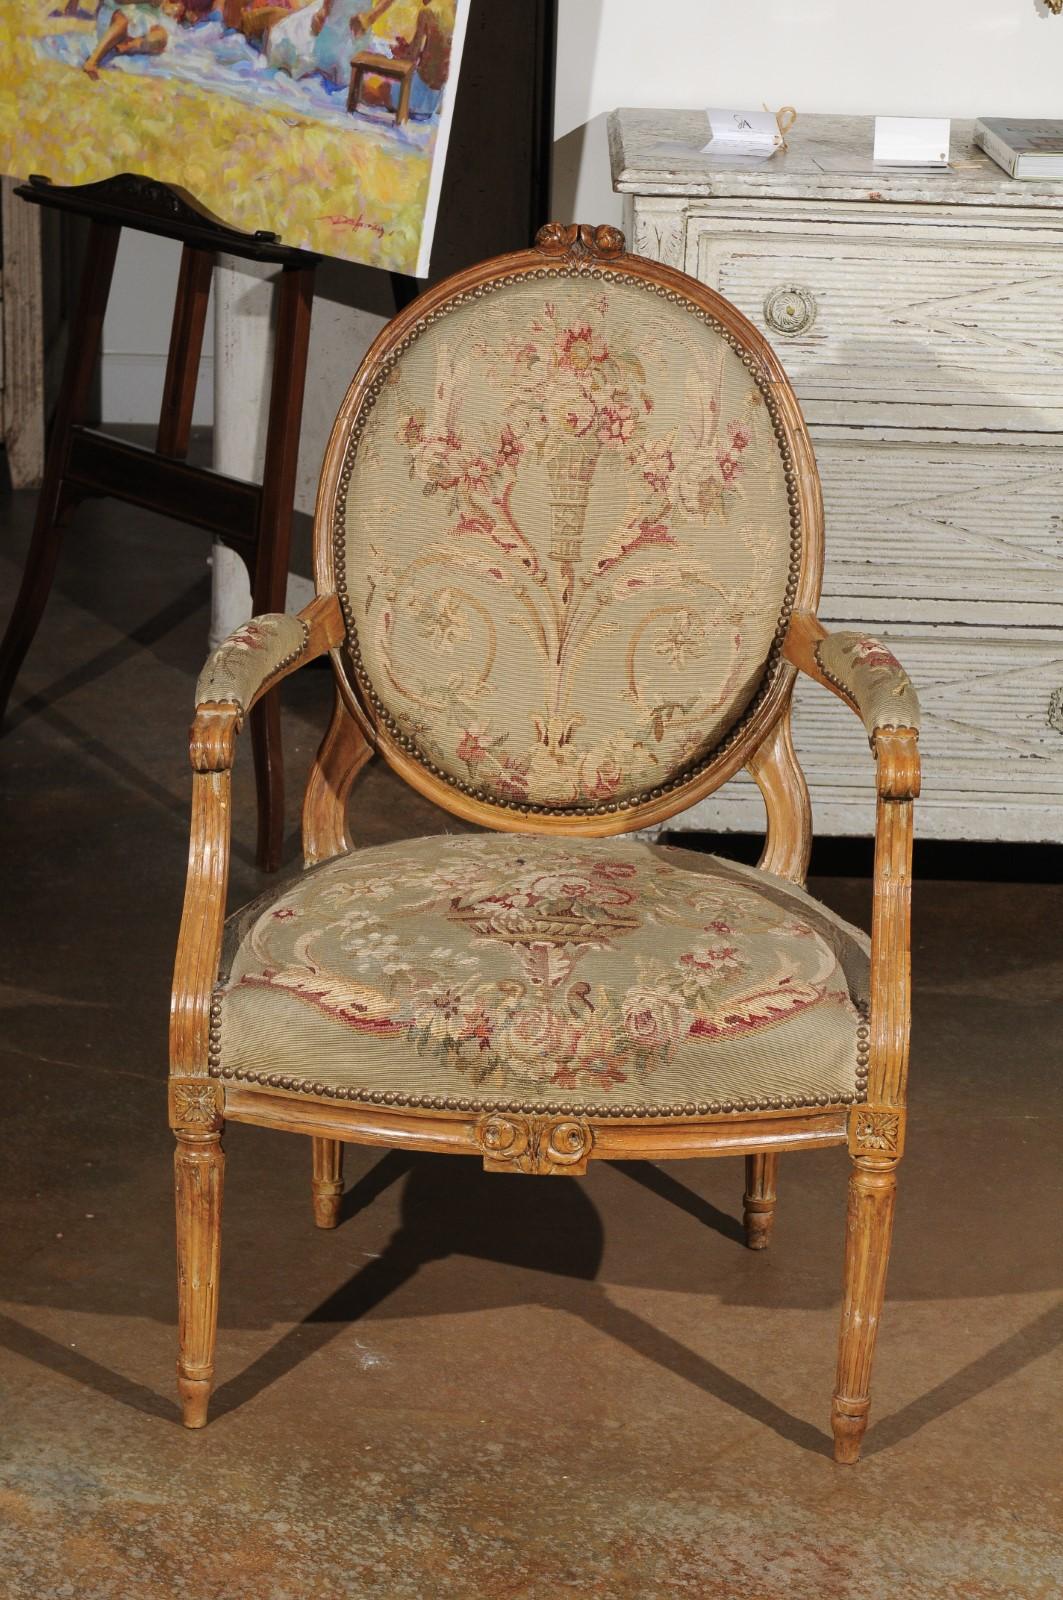 French Louis XVI Period 18th Century Armchair with Floral Tapestry Upholstery In Good Condition For Sale In Atlanta, GA